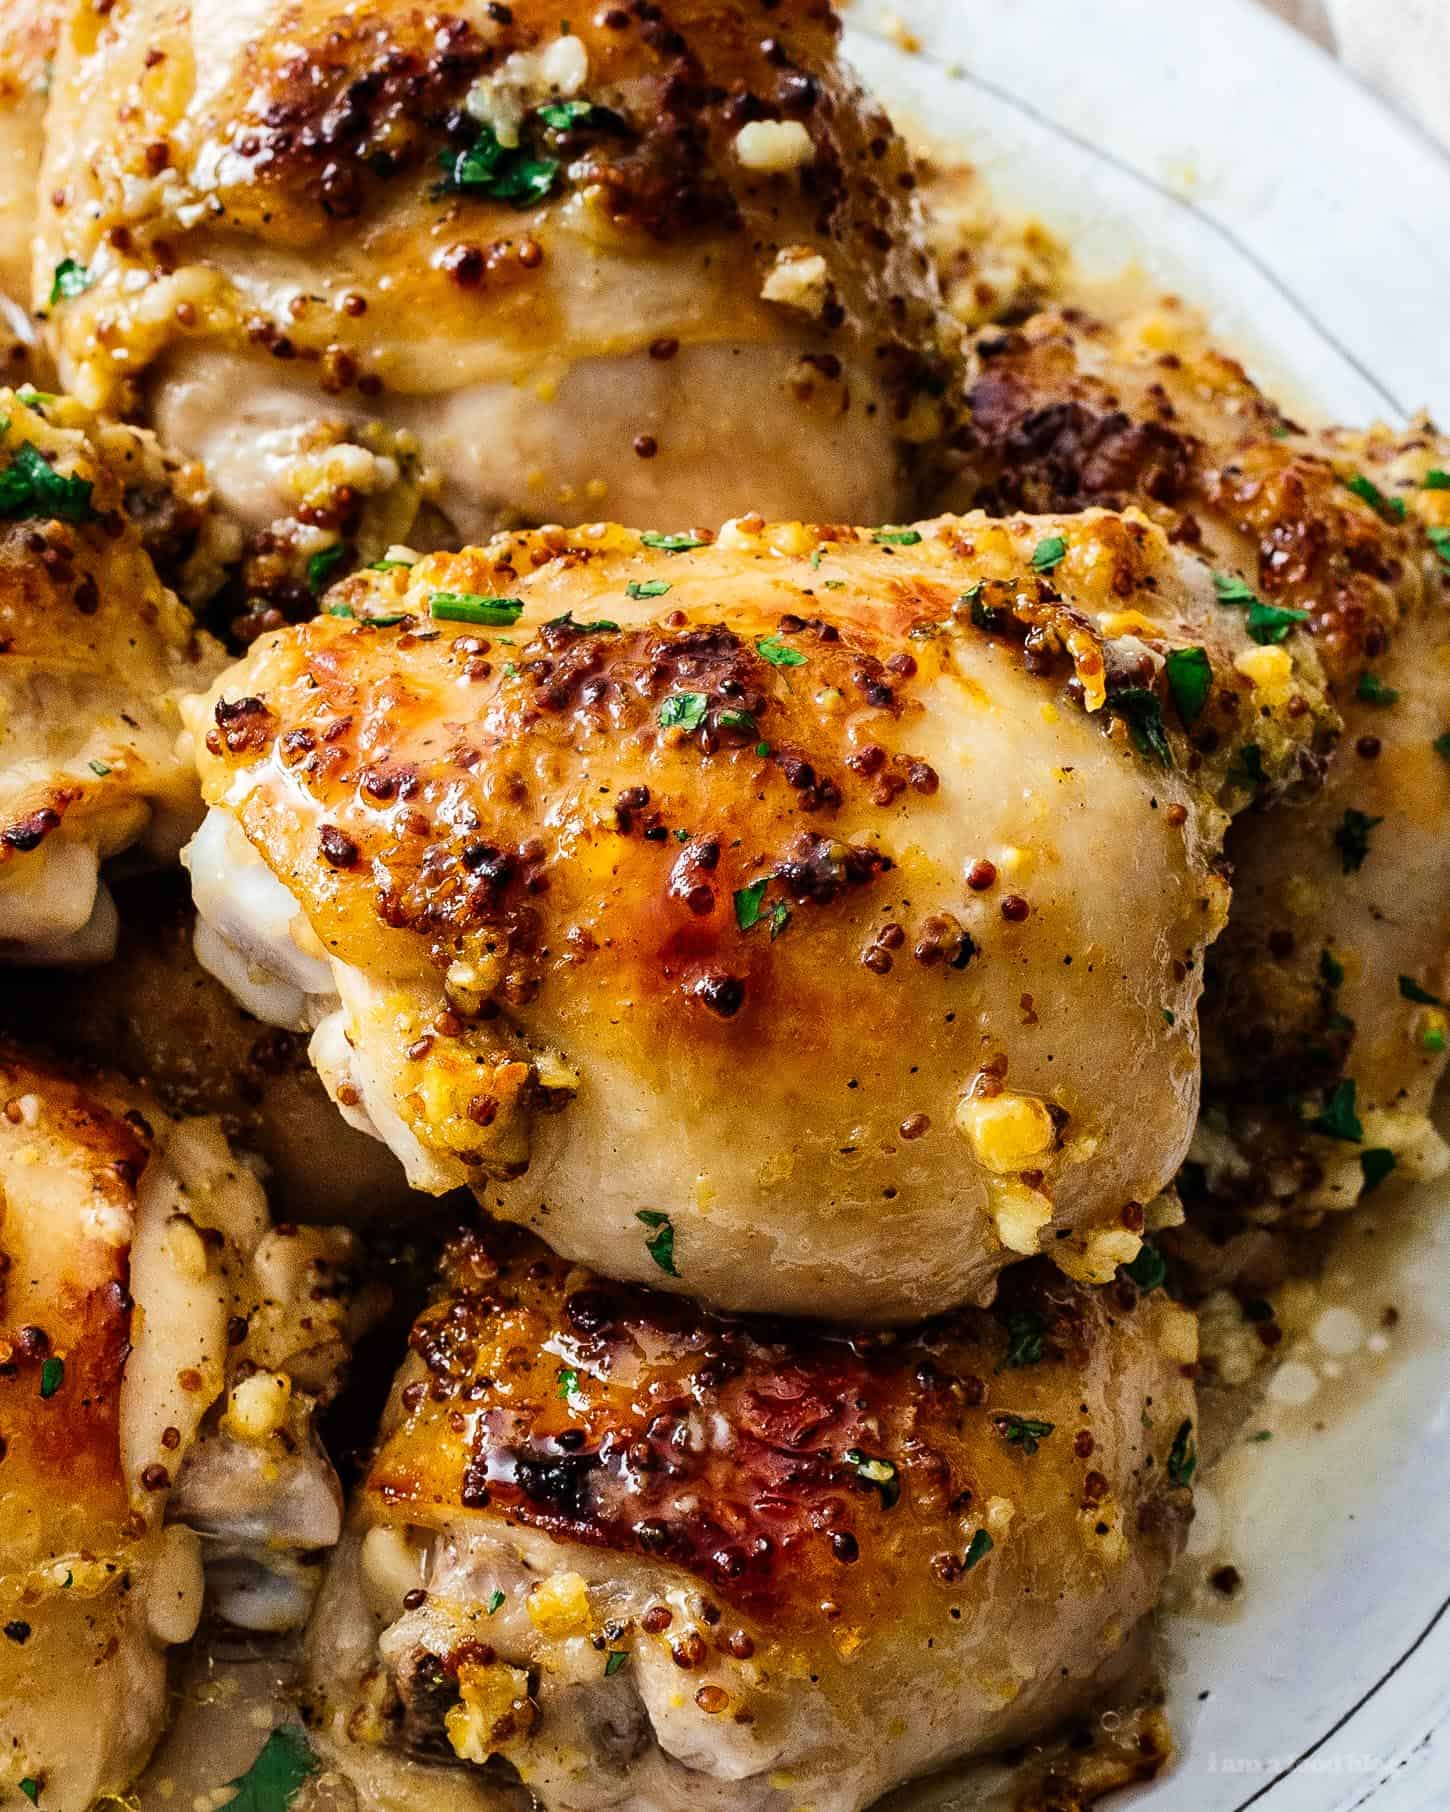 baked chicken thighs | www.iamafoodblog.com